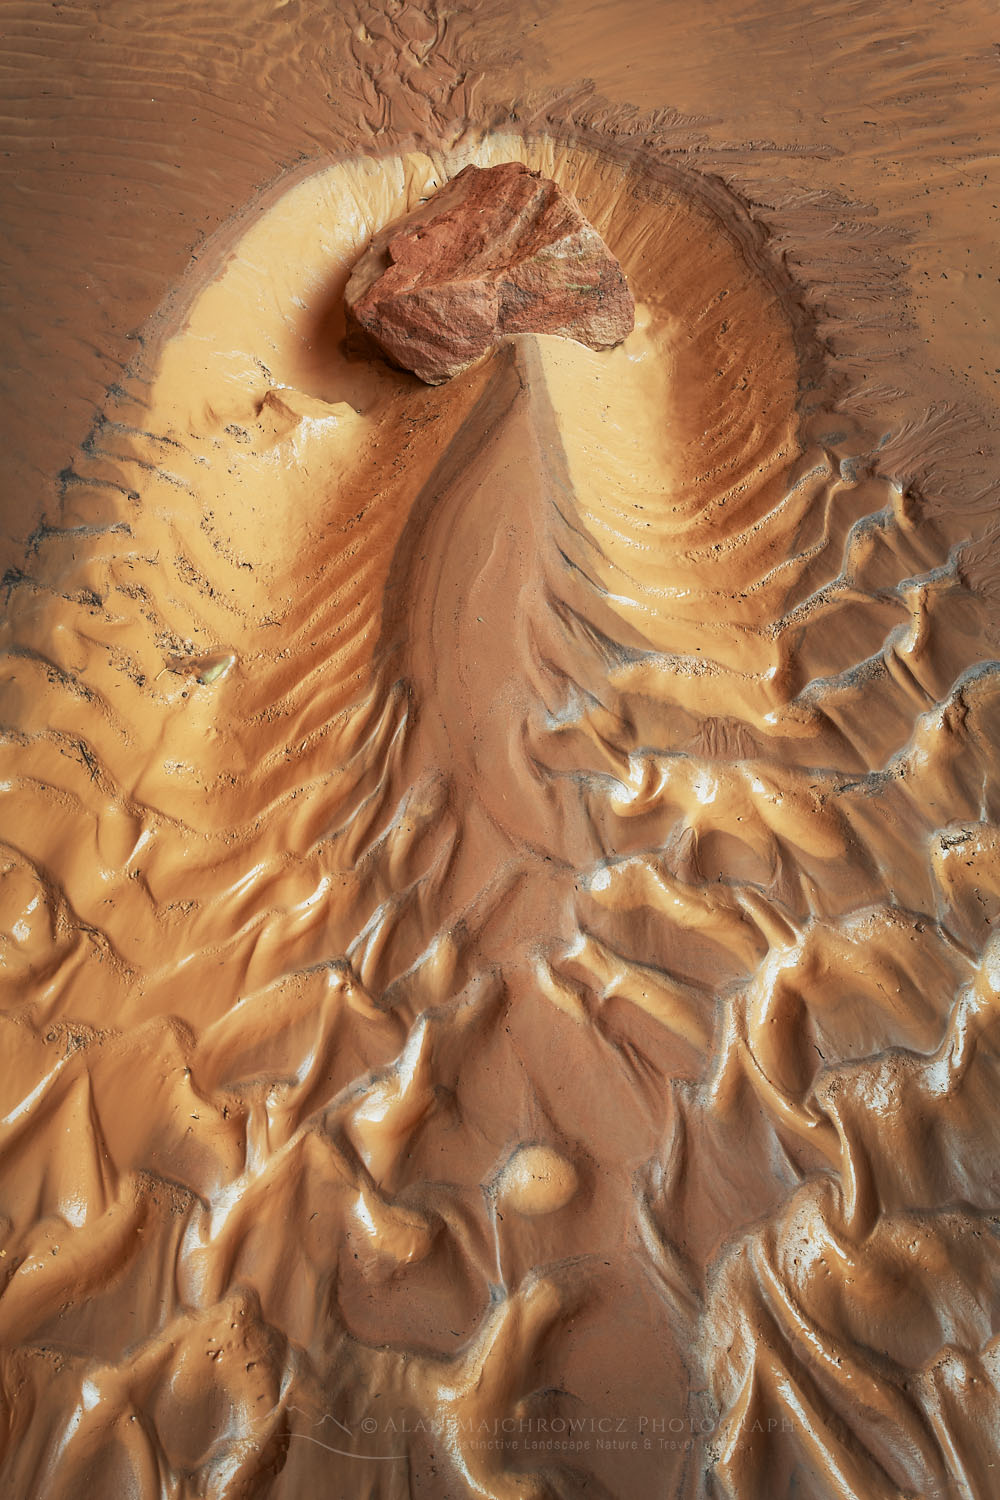 Sand and mud patterns resembling a horshoe crab in Coyote Gulch, Glen Canyon National Recreation Area Utah #76326